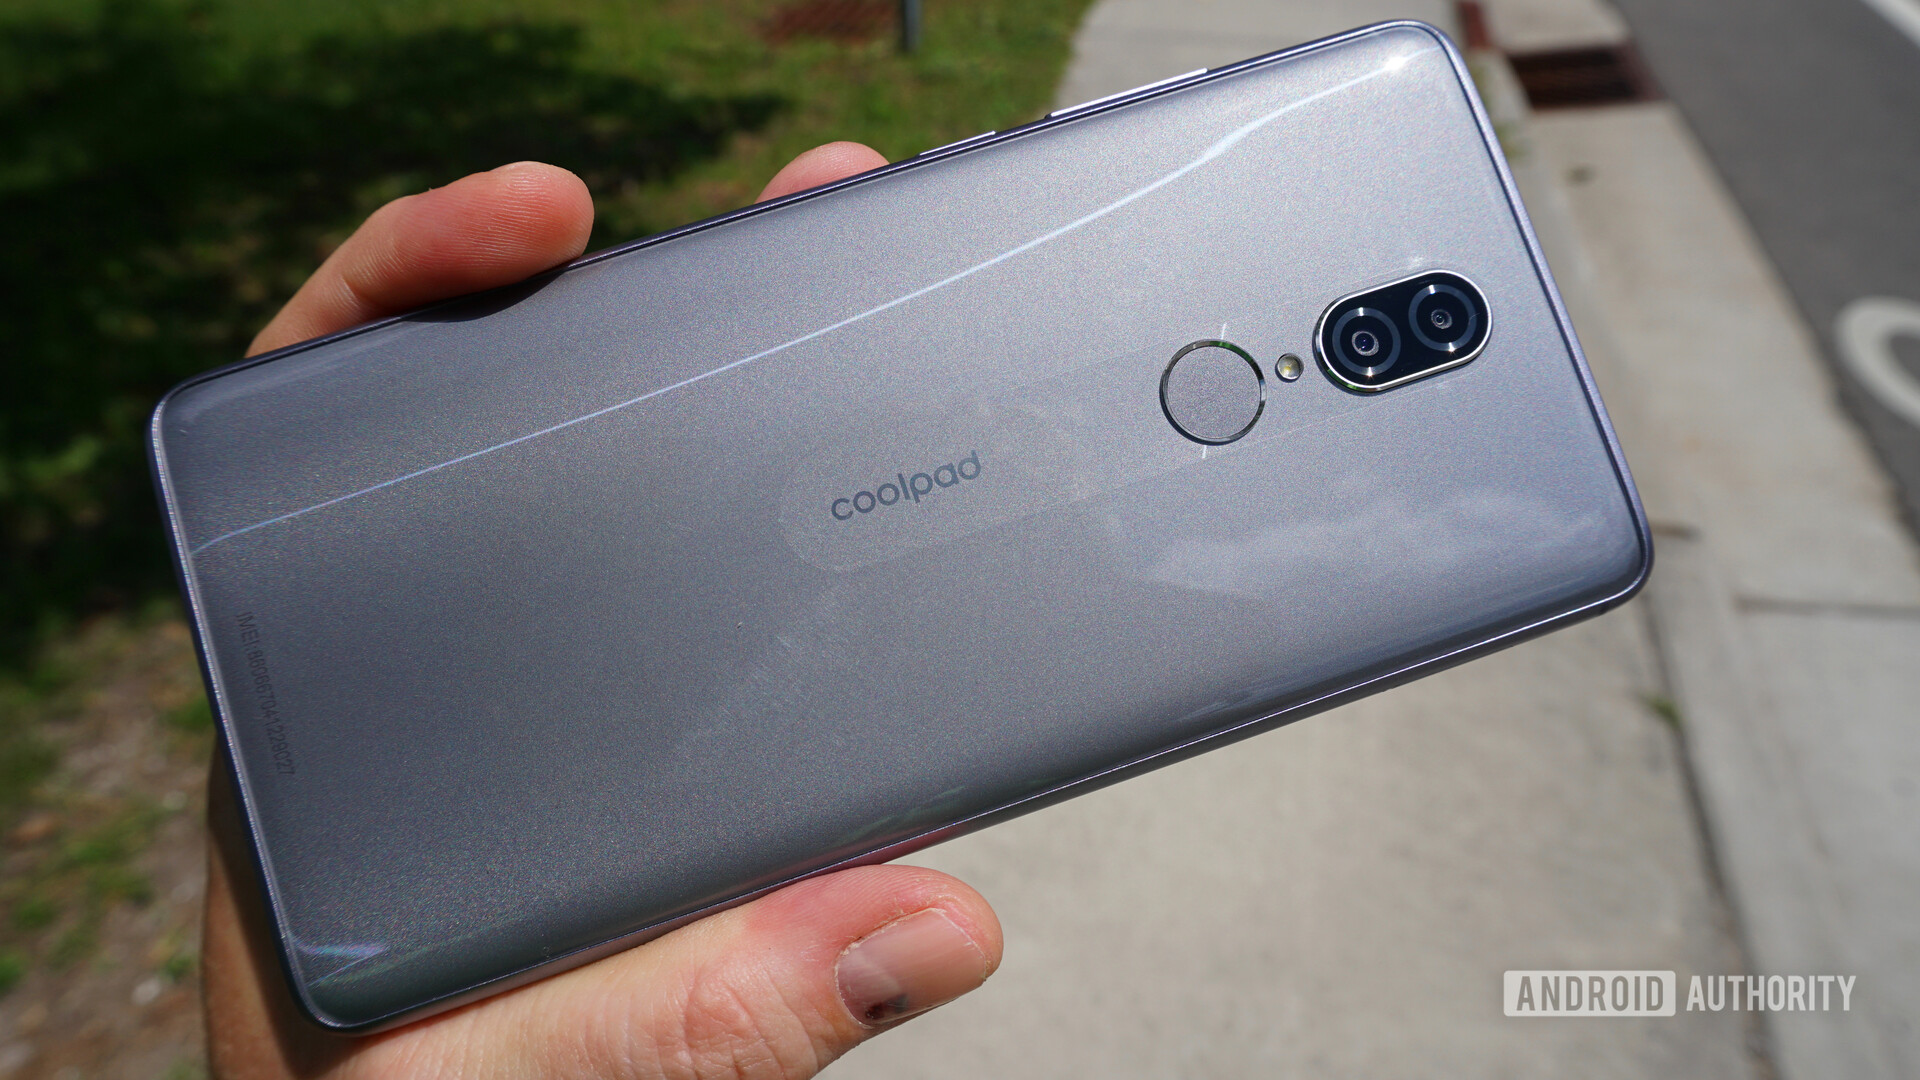 How to Unlock a Coolpad Phone Without the Password? 